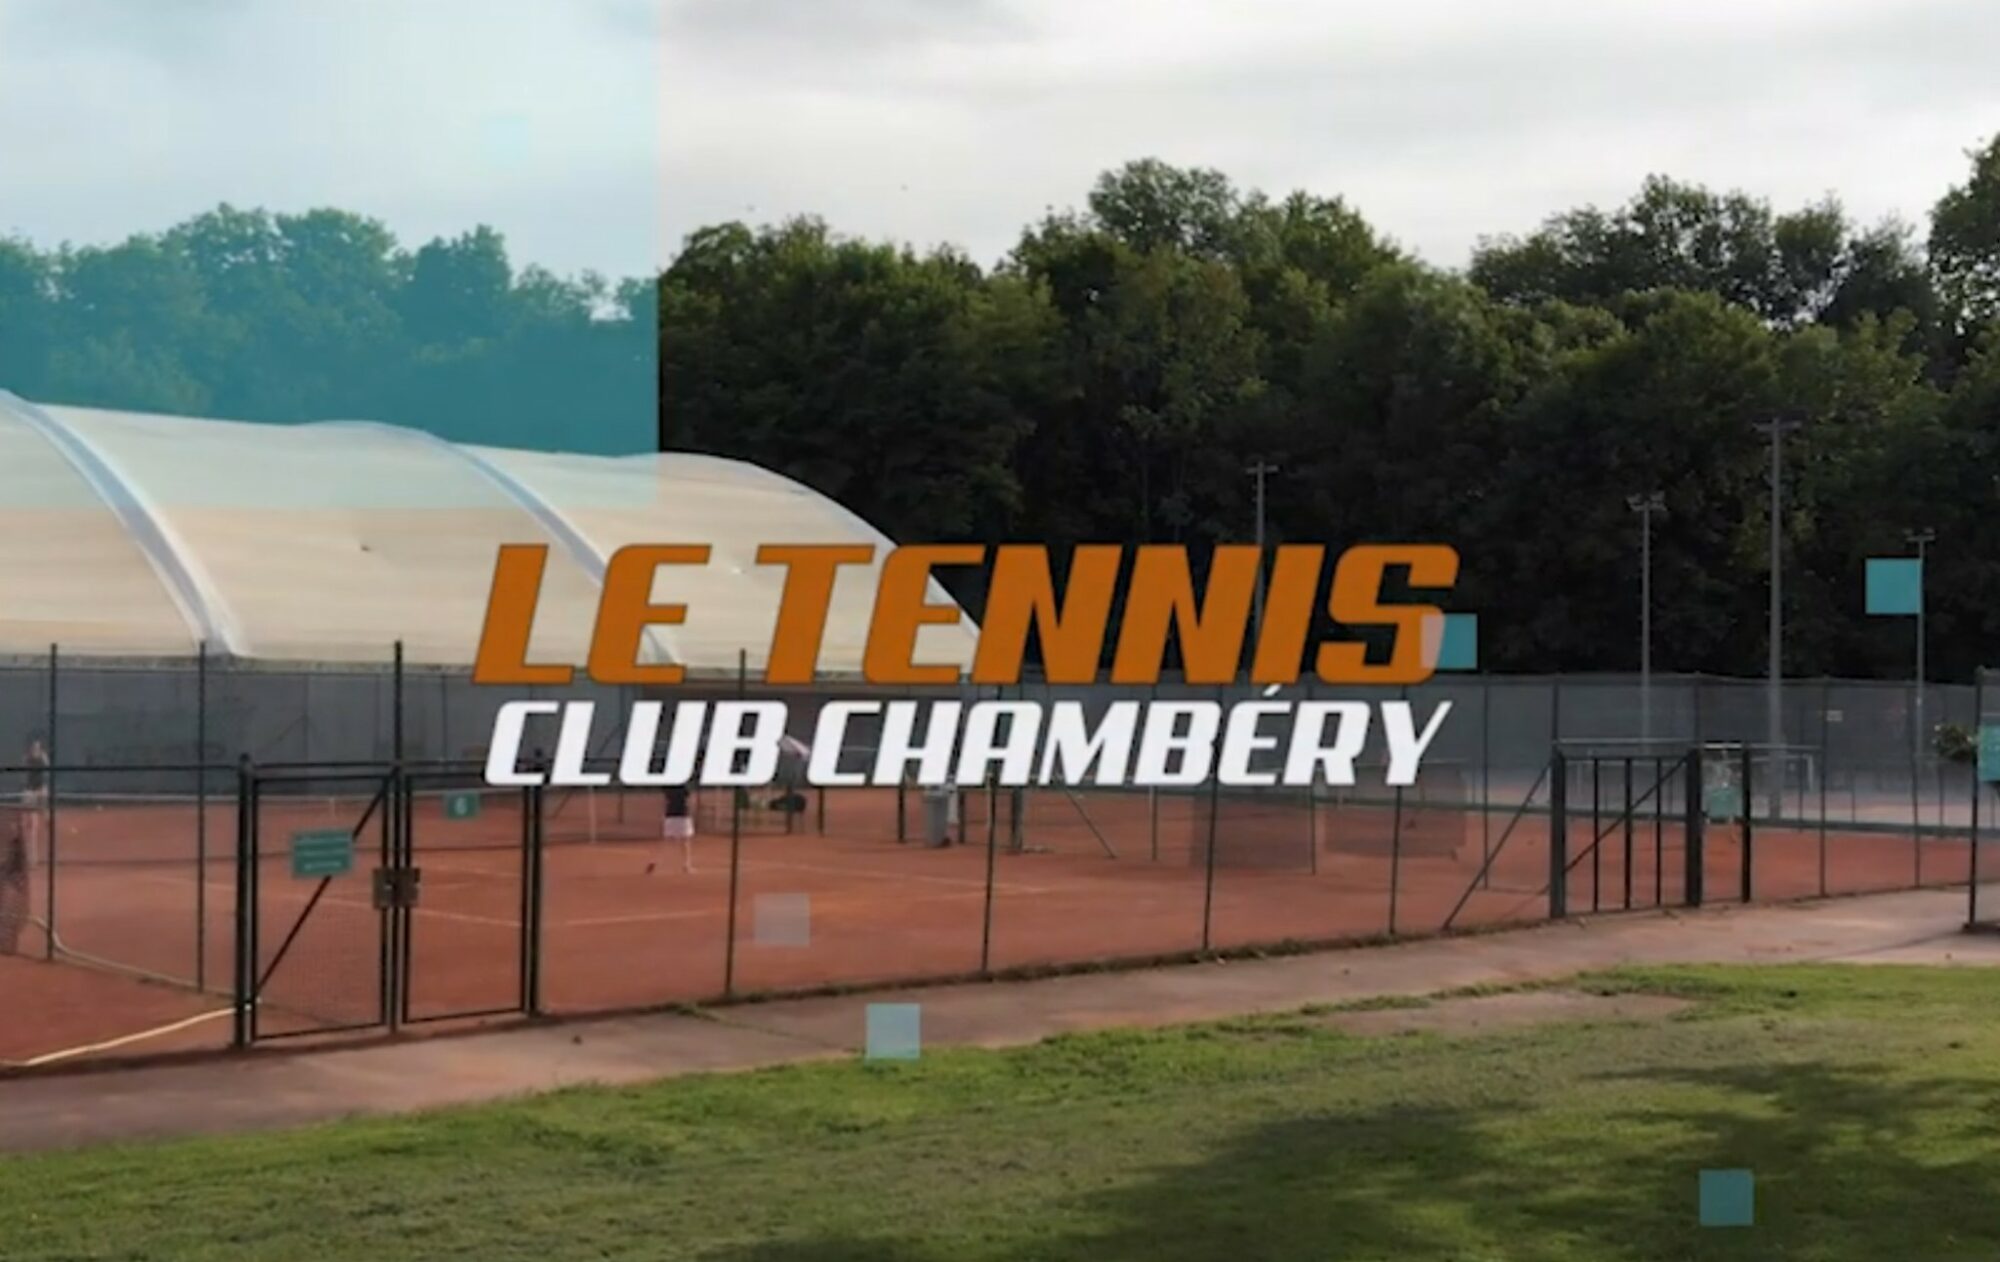 Le padel in Chambéry: Bis bald!